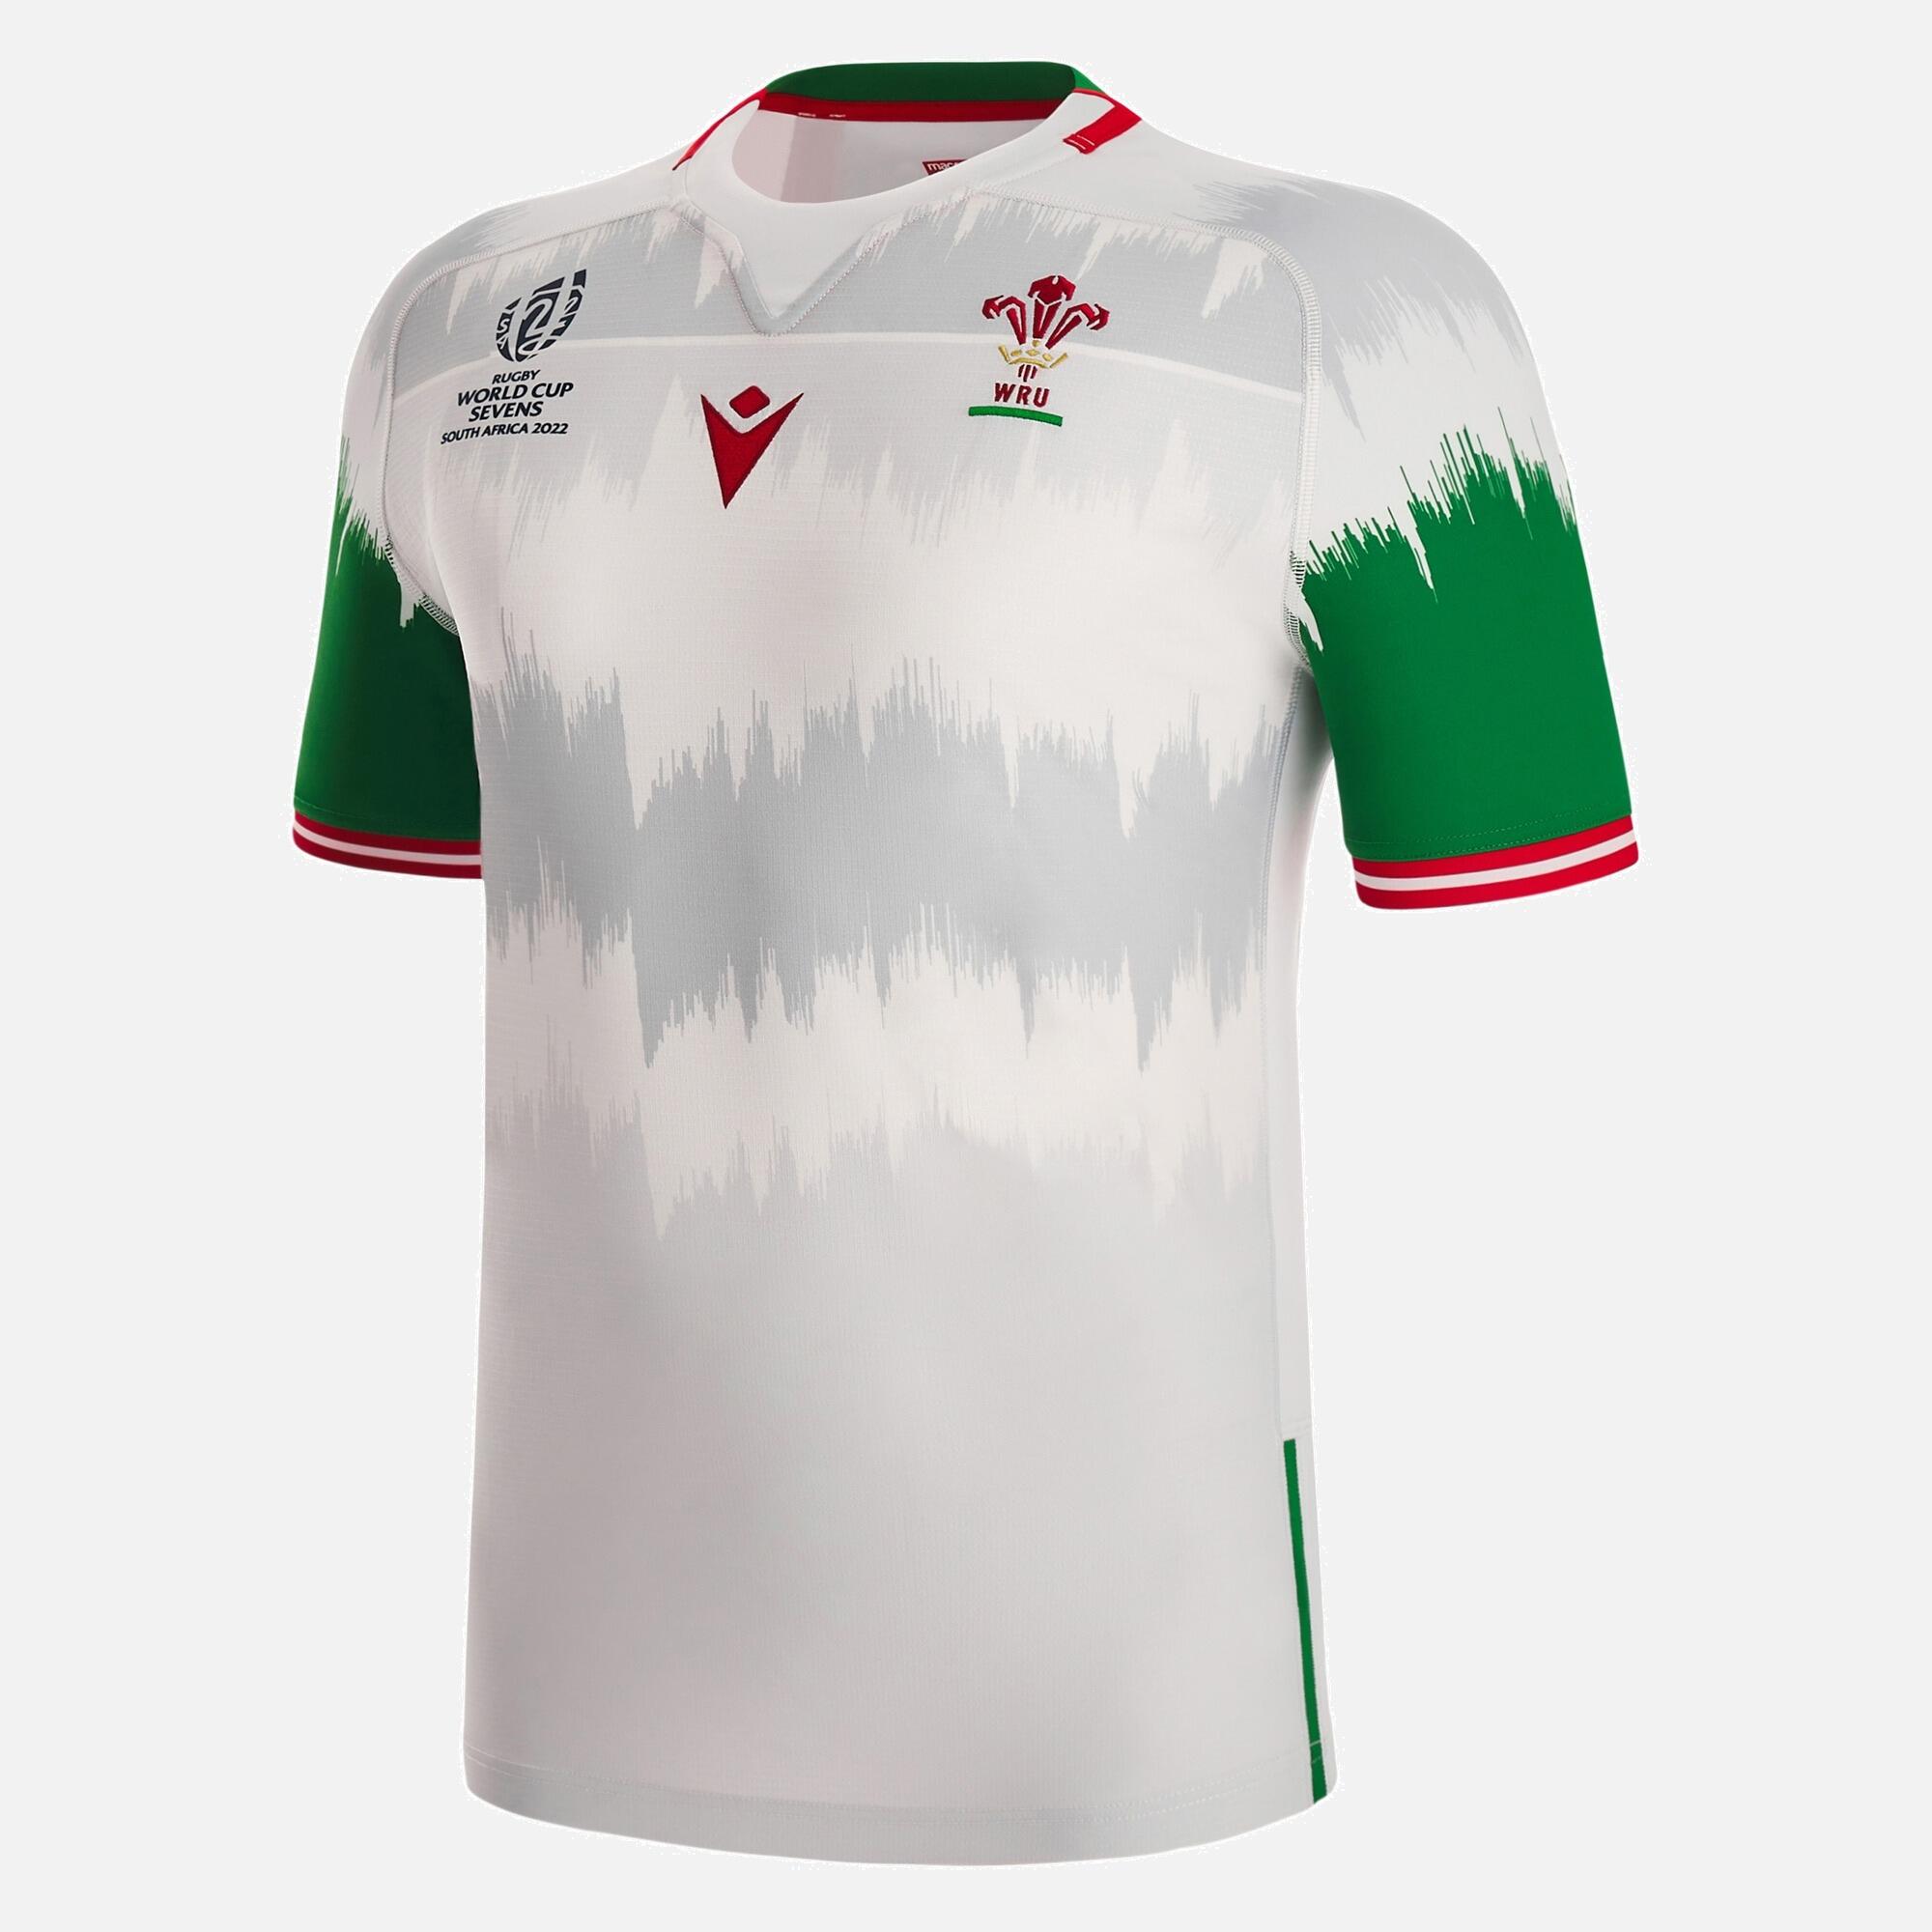 Macron Wales WRU 22/23 Away 7s Rugby World Cup Mens Technical Rugby Shirt 1/4